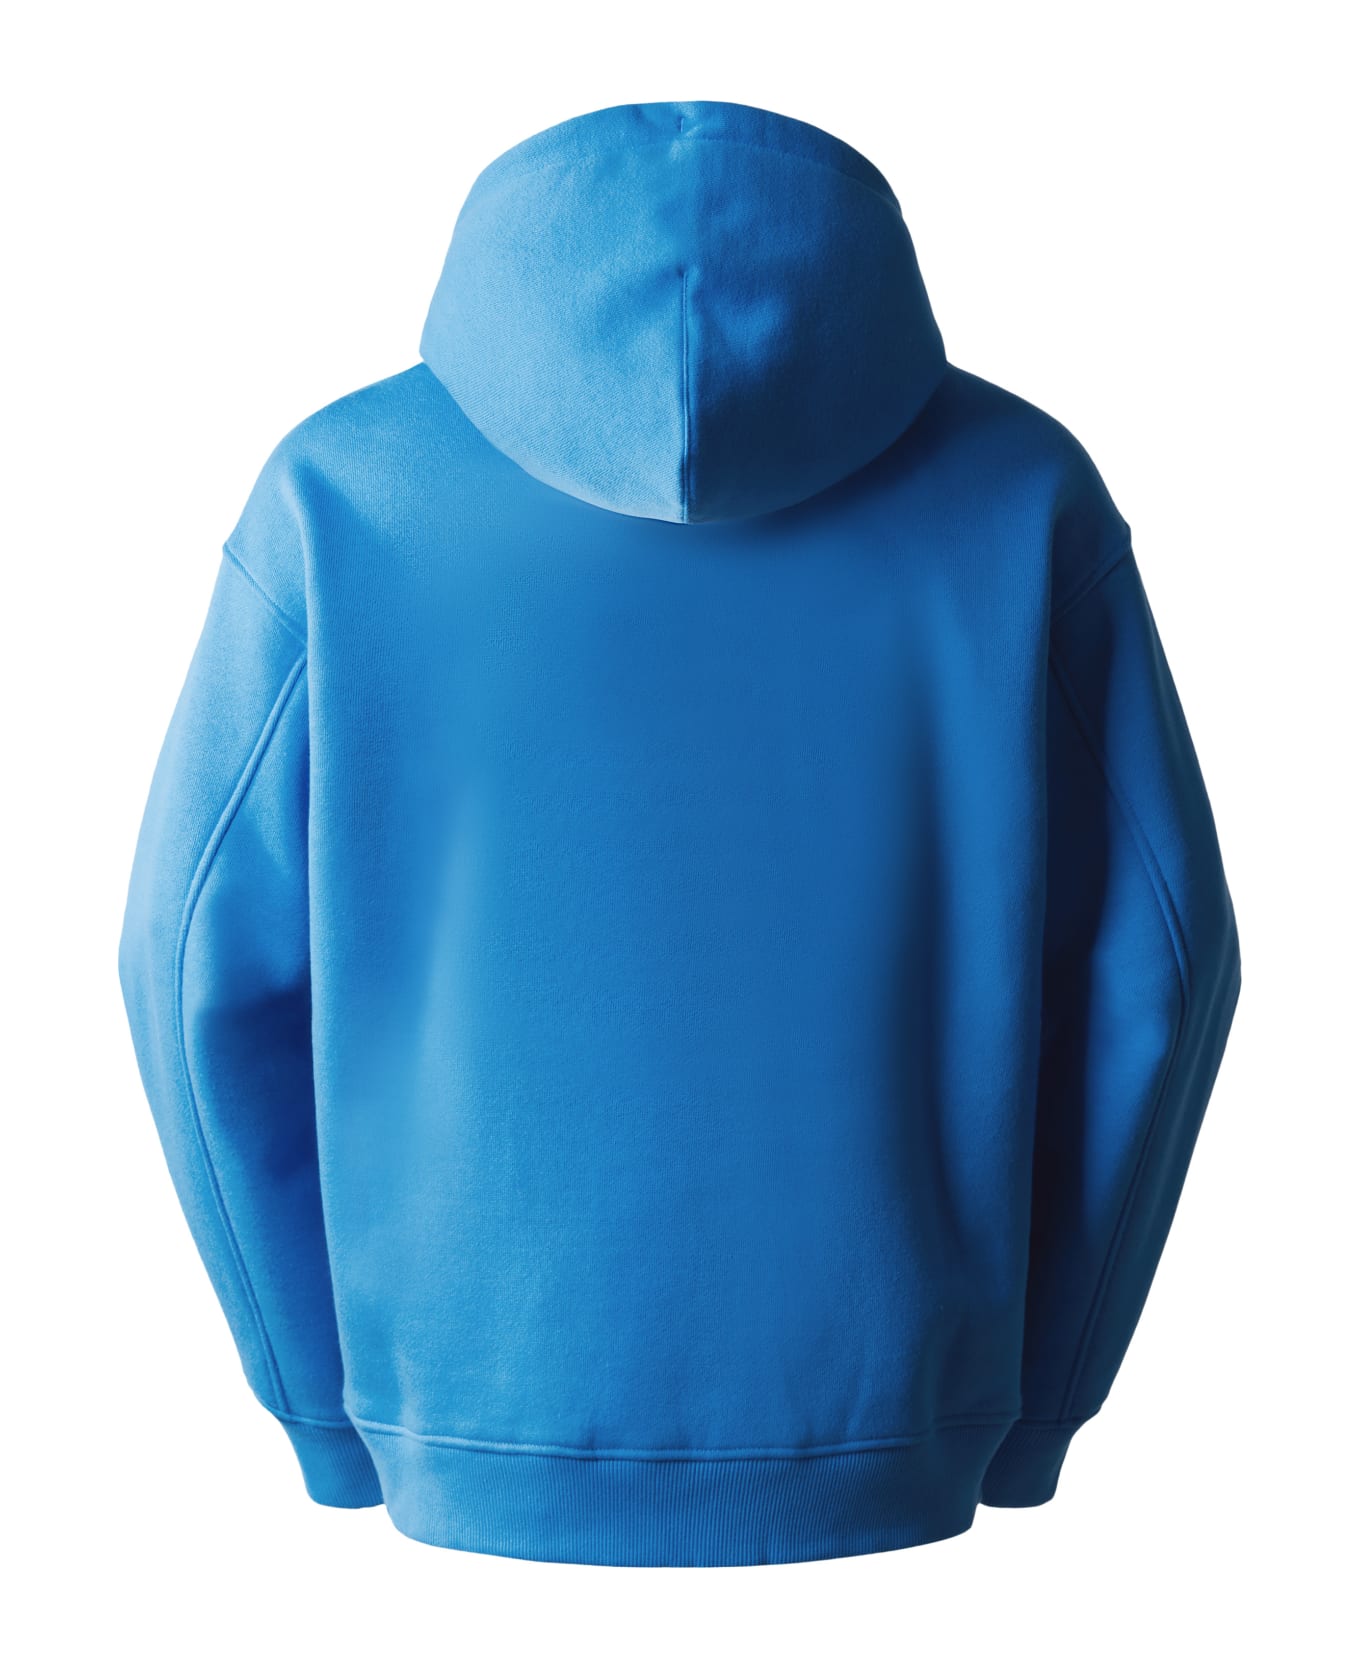 The North Face M Icon Hoodie - Super Sonic Blue